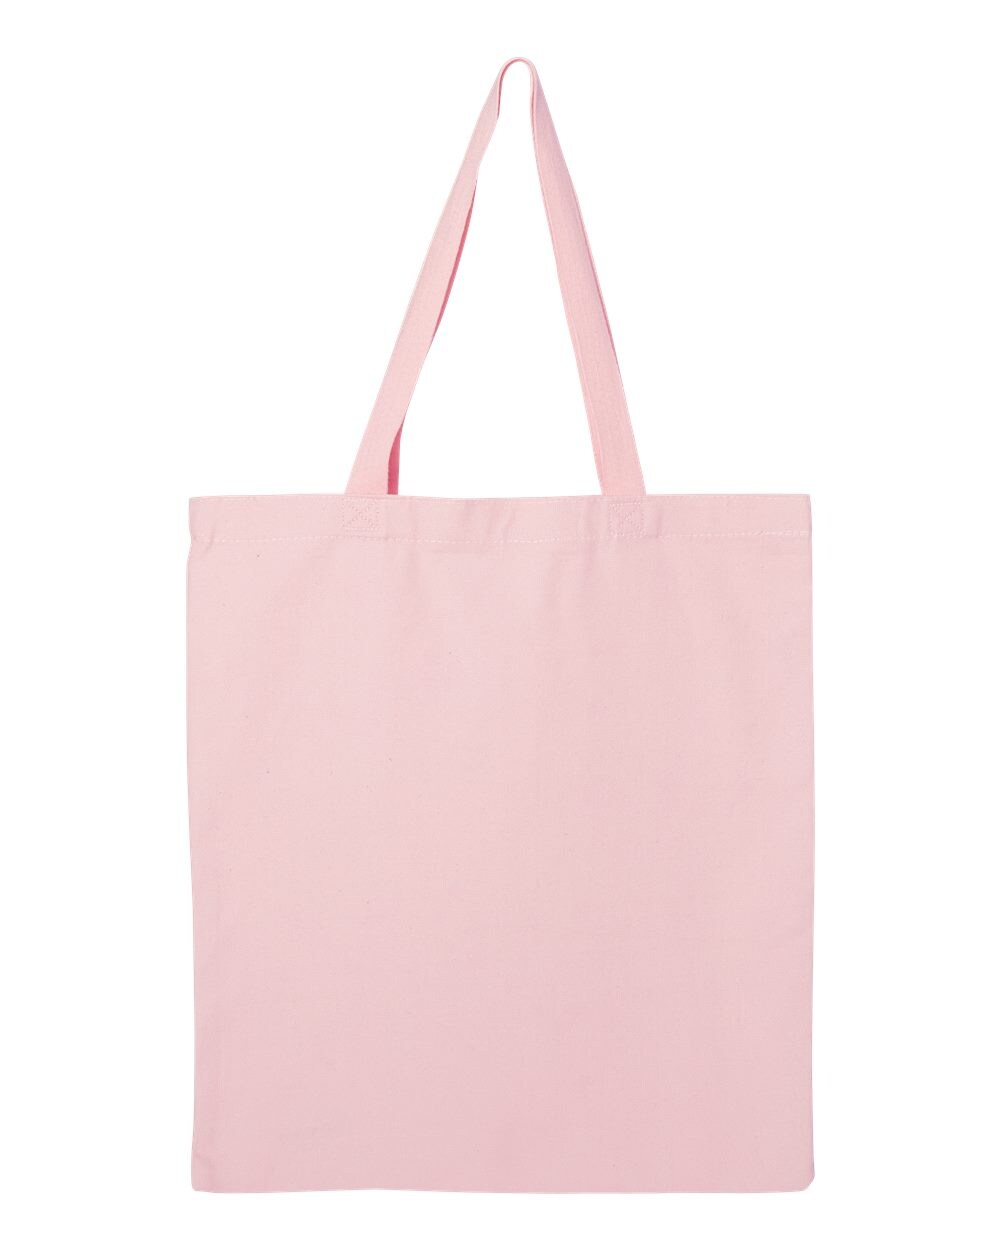 Durable Canvas Tote by Make Market®, Michaels